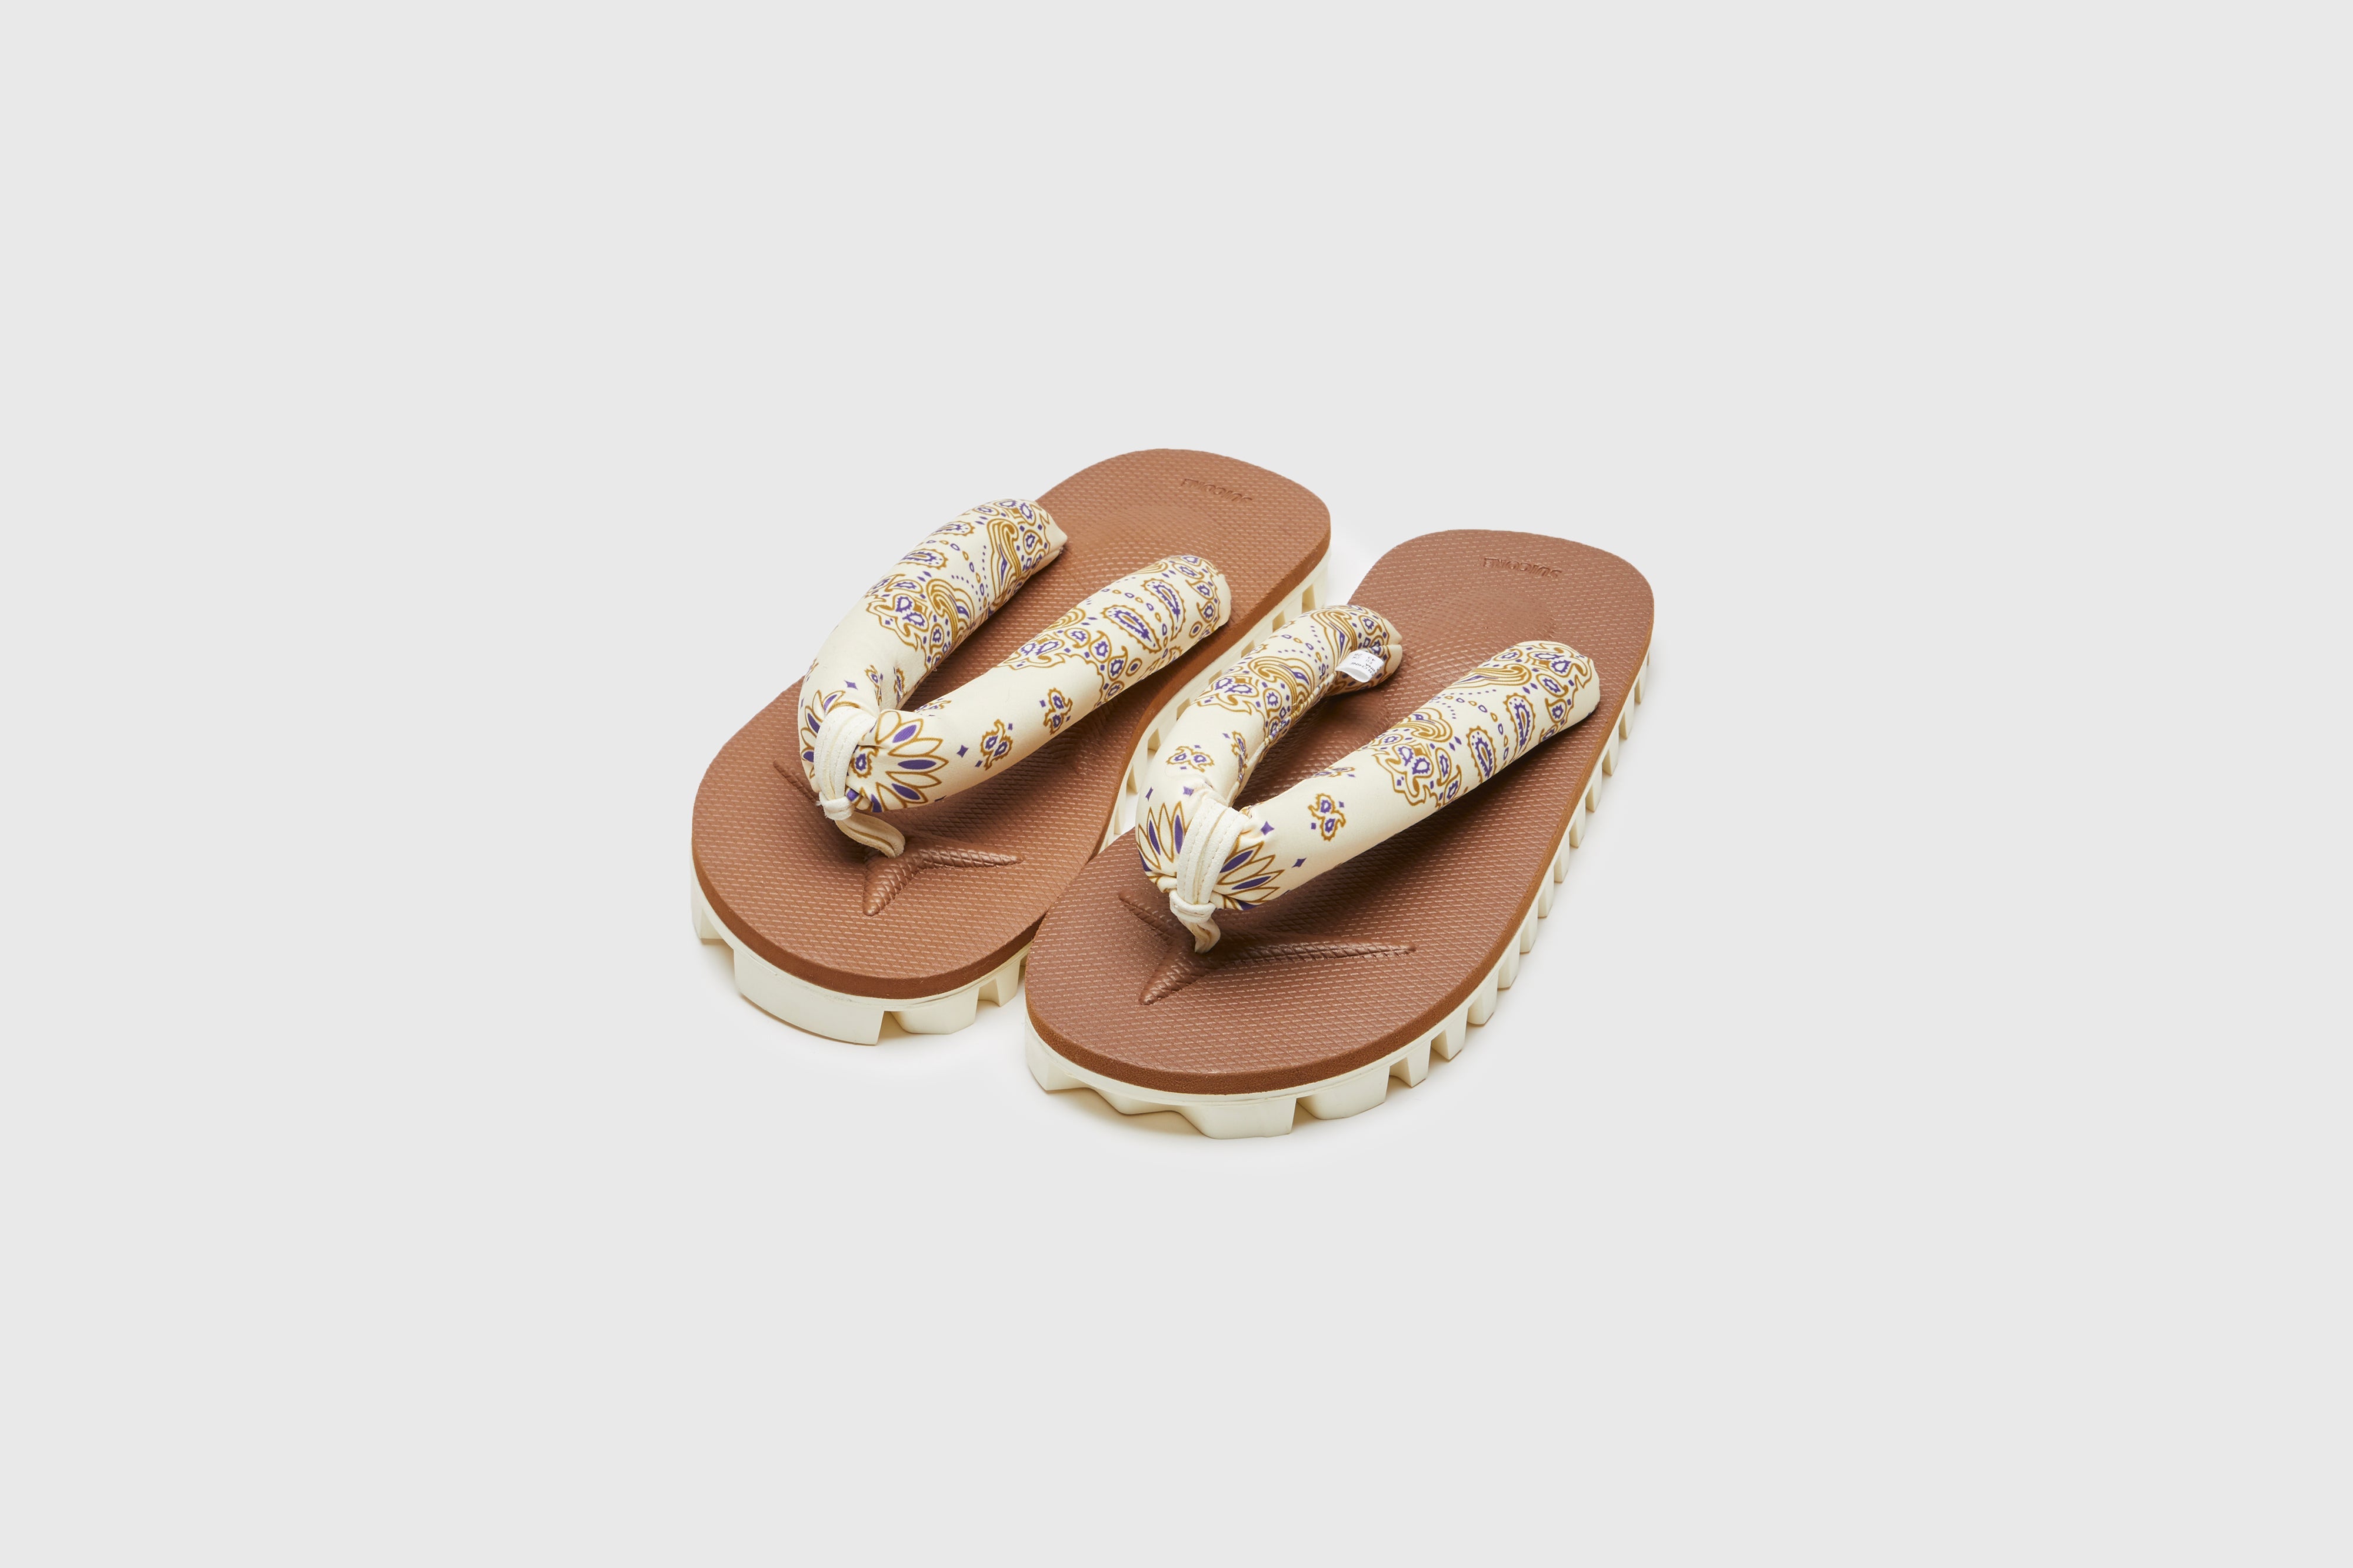 SUICOKE GTA-PT05 sandals with ivory & brown nylon upper, ivory & brown midsole and sole, straps and logo patch. From Spring/Summer 2023 collection on eightywingold Web Store, an official partner of SUICOKE. OG-226-PT05 IVORY X BROWN